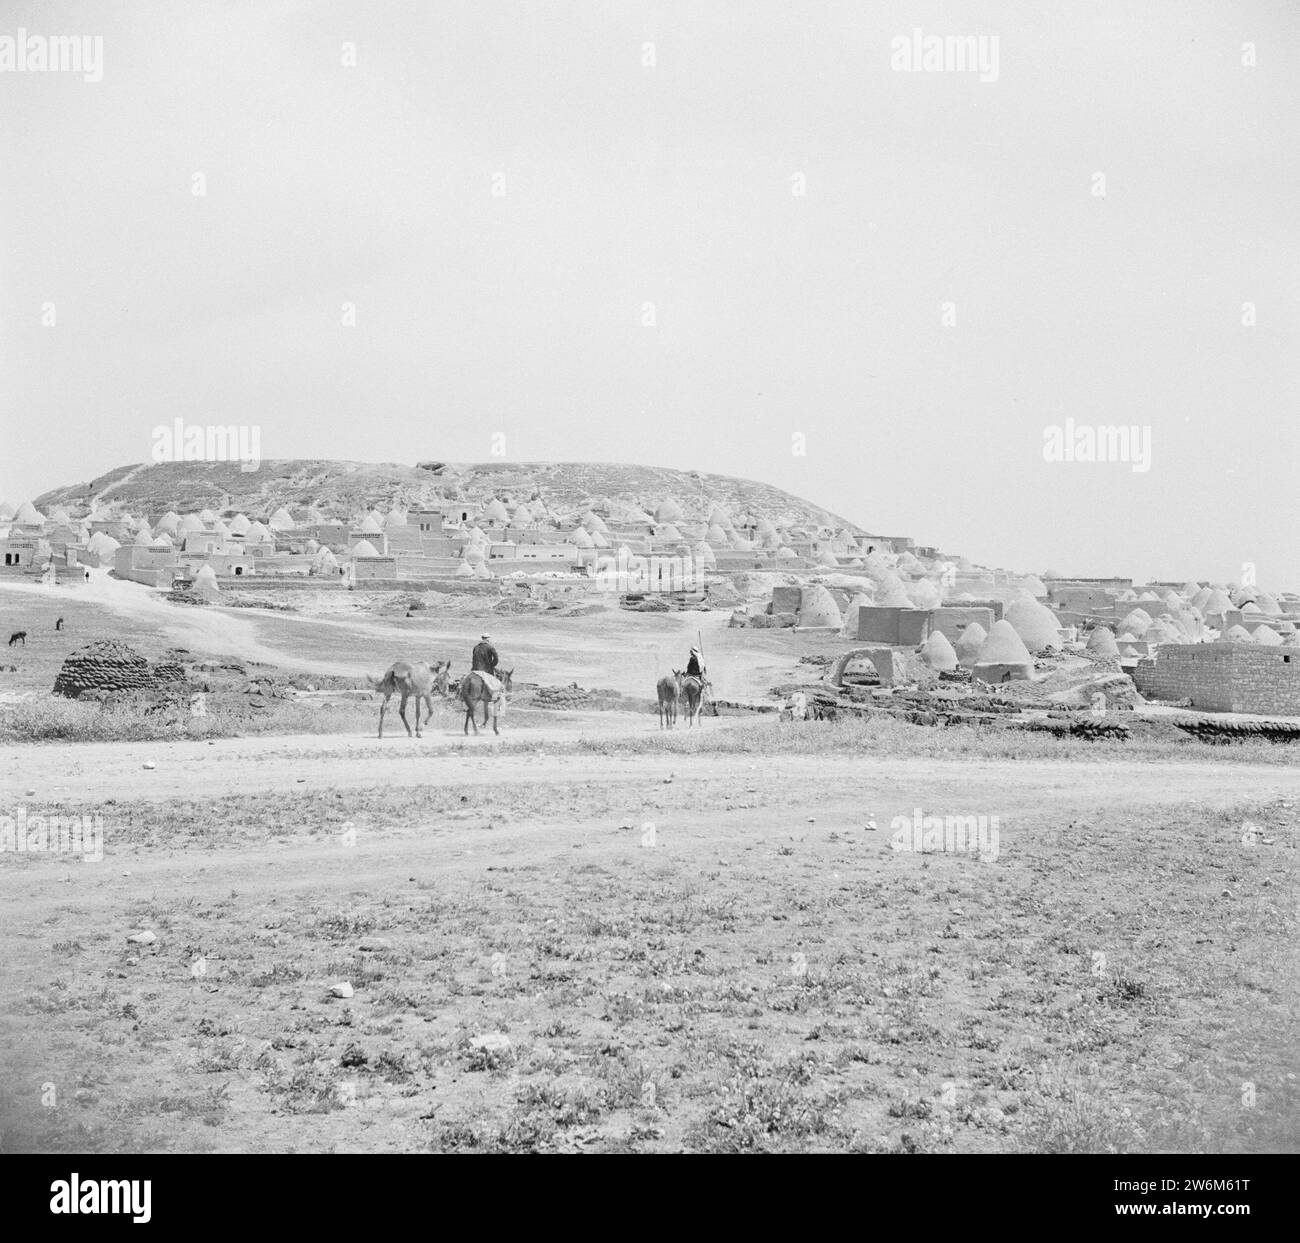 Landscape in the vicinity of Khan Sheikhun ca. 1950-1955 Stock Photo